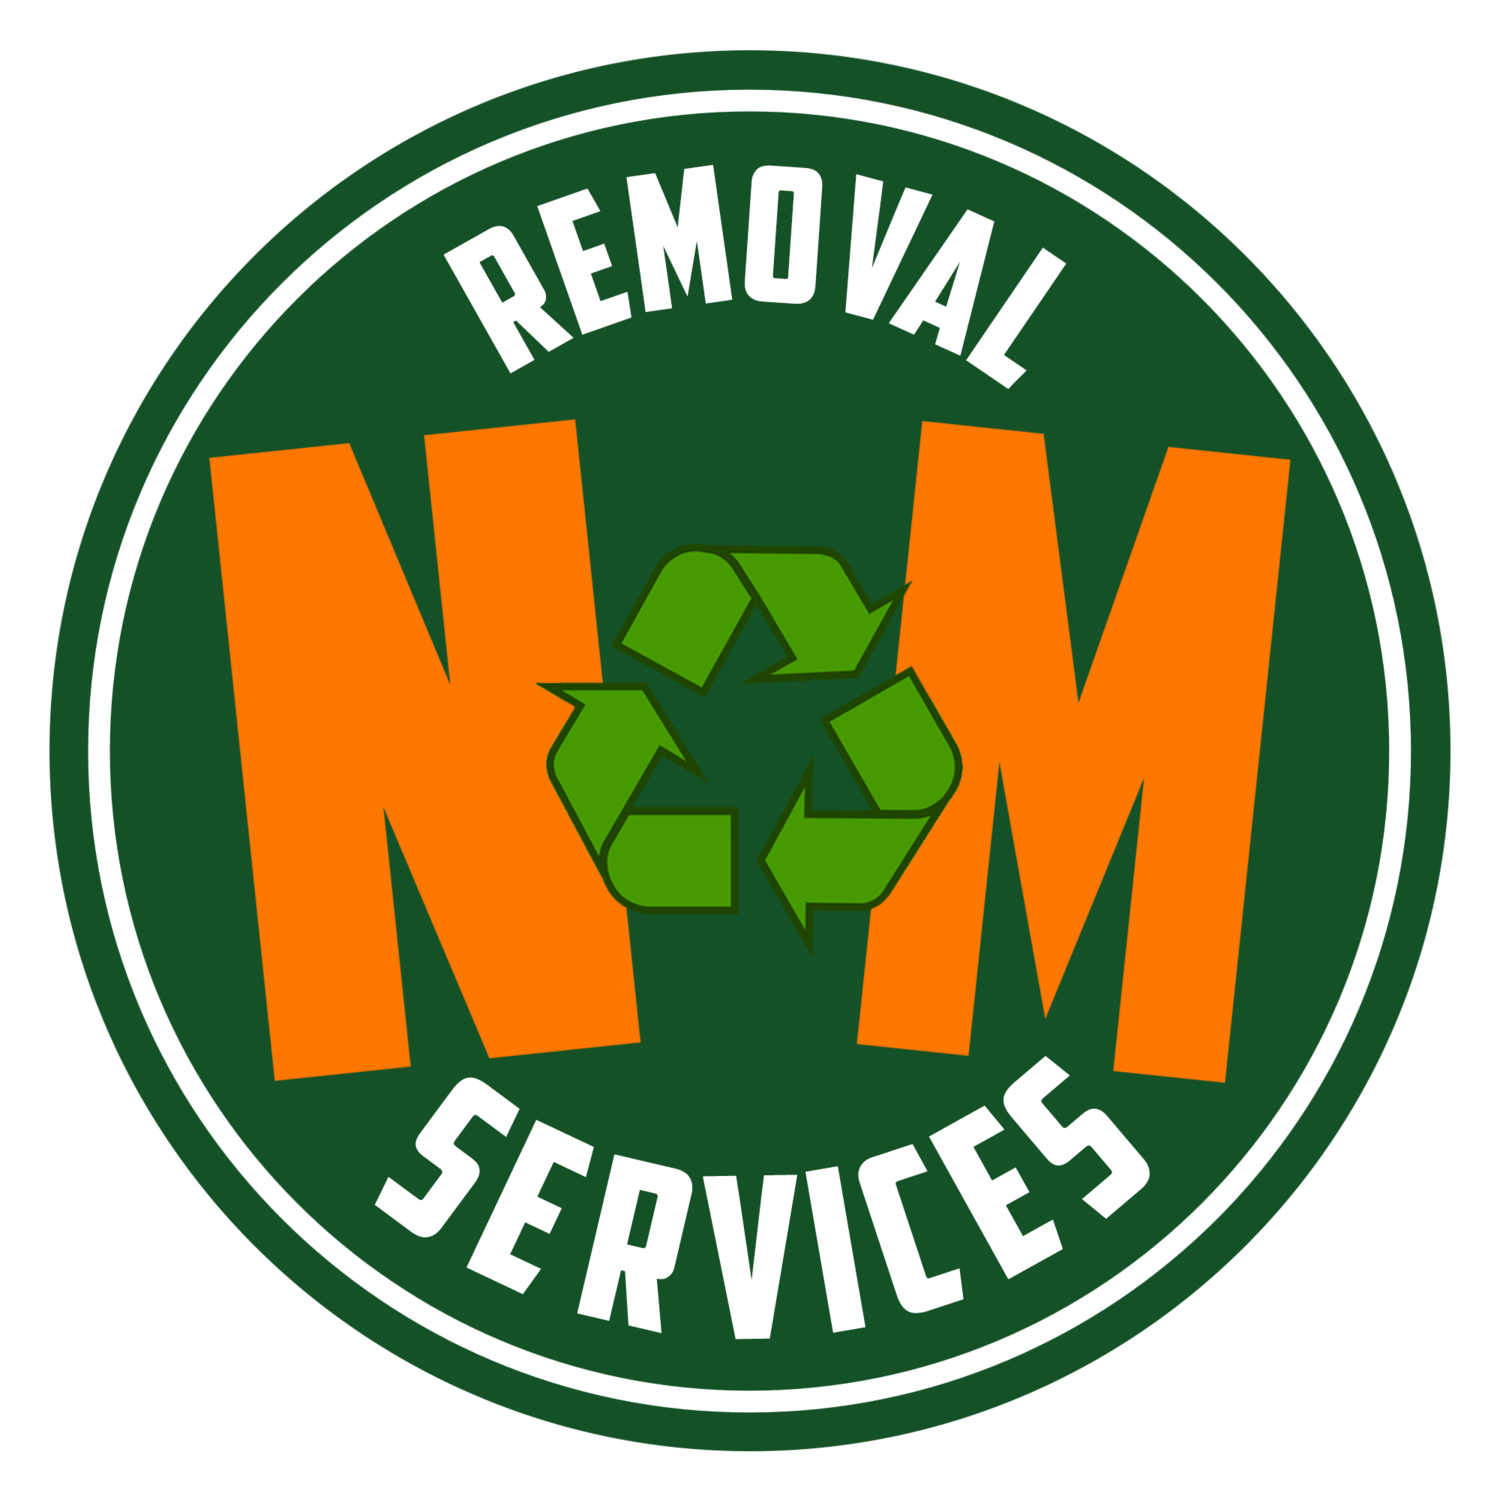 NM Removals - South Yorkshire waste removal specialists!